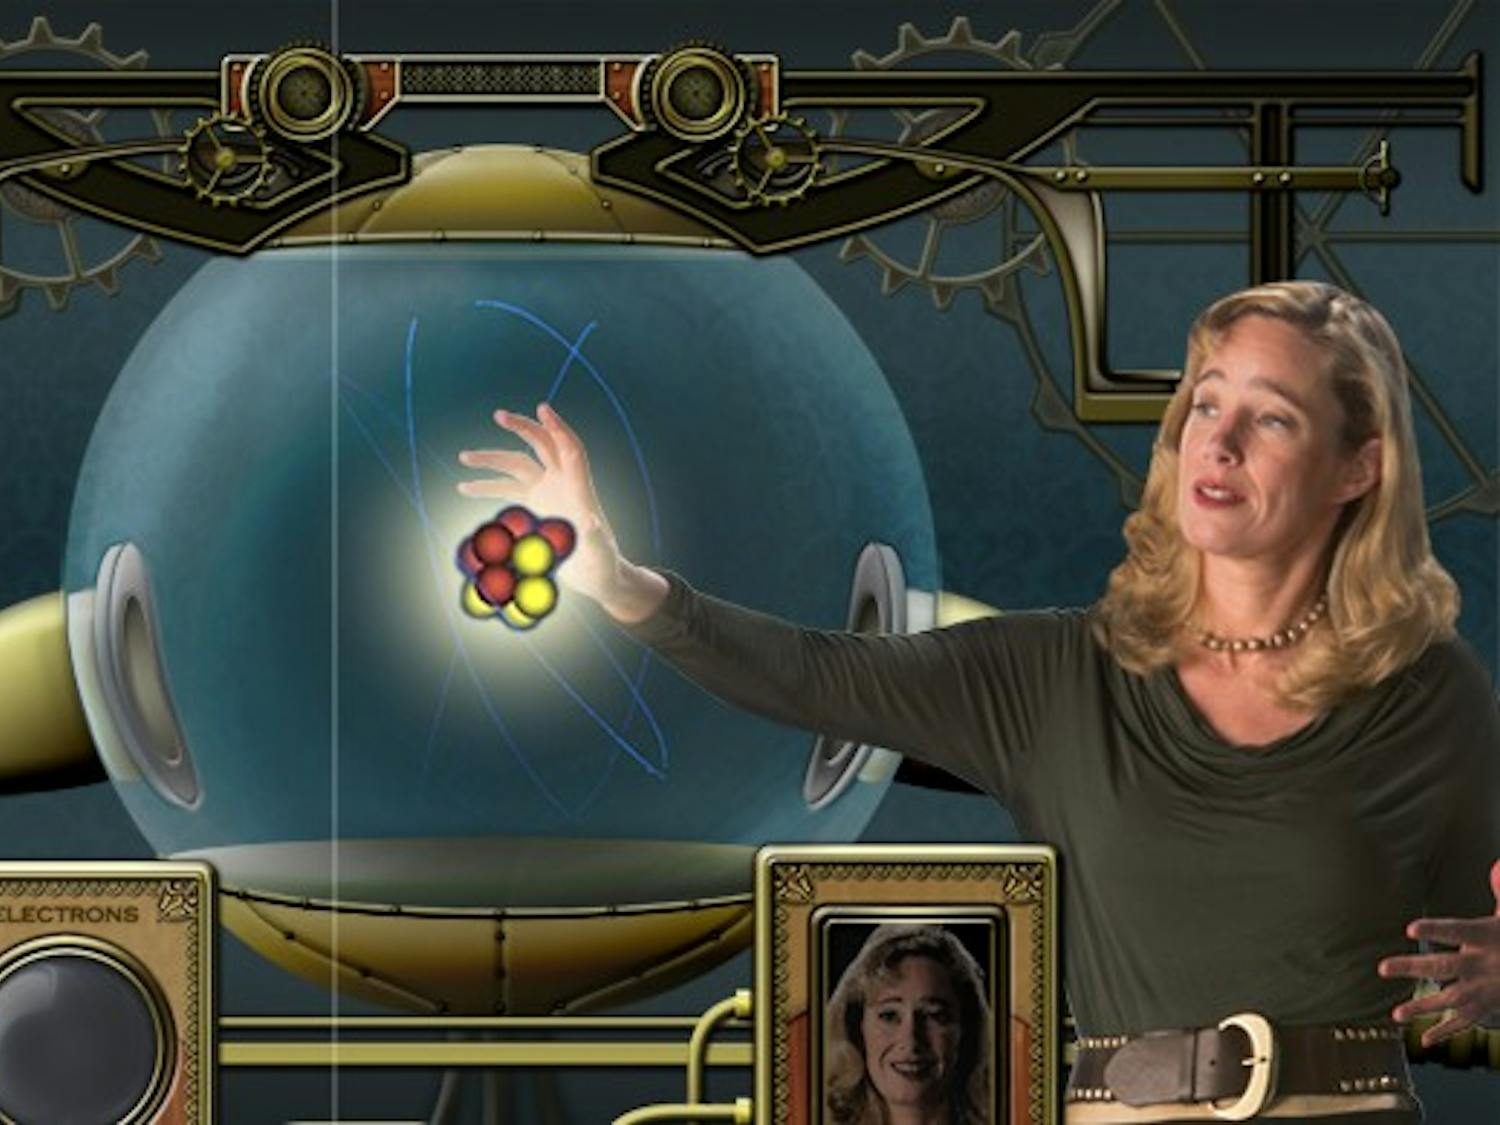 ASU psychology research professor and founder of Embodied Games Mina C. Johnson-Glenburg appears in a 2014 mock-up of what it looks like to play the game&nbsp;"Electron Counter."